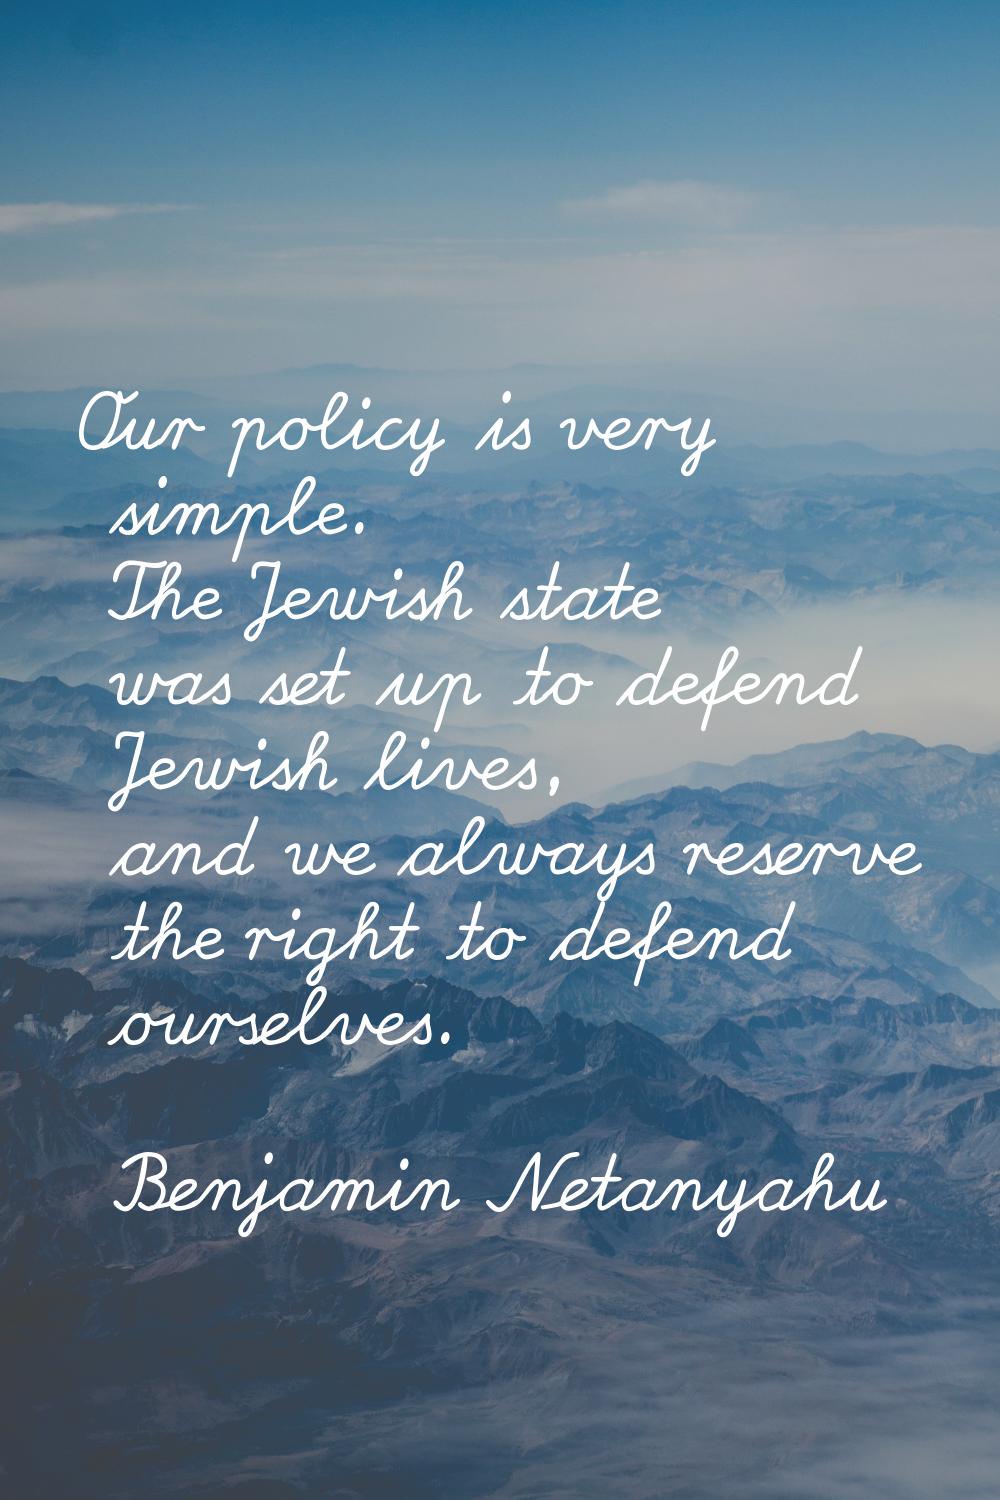 Our policy is very simple. The Jewish state was set up to defend Jewish lives, and we always reserv